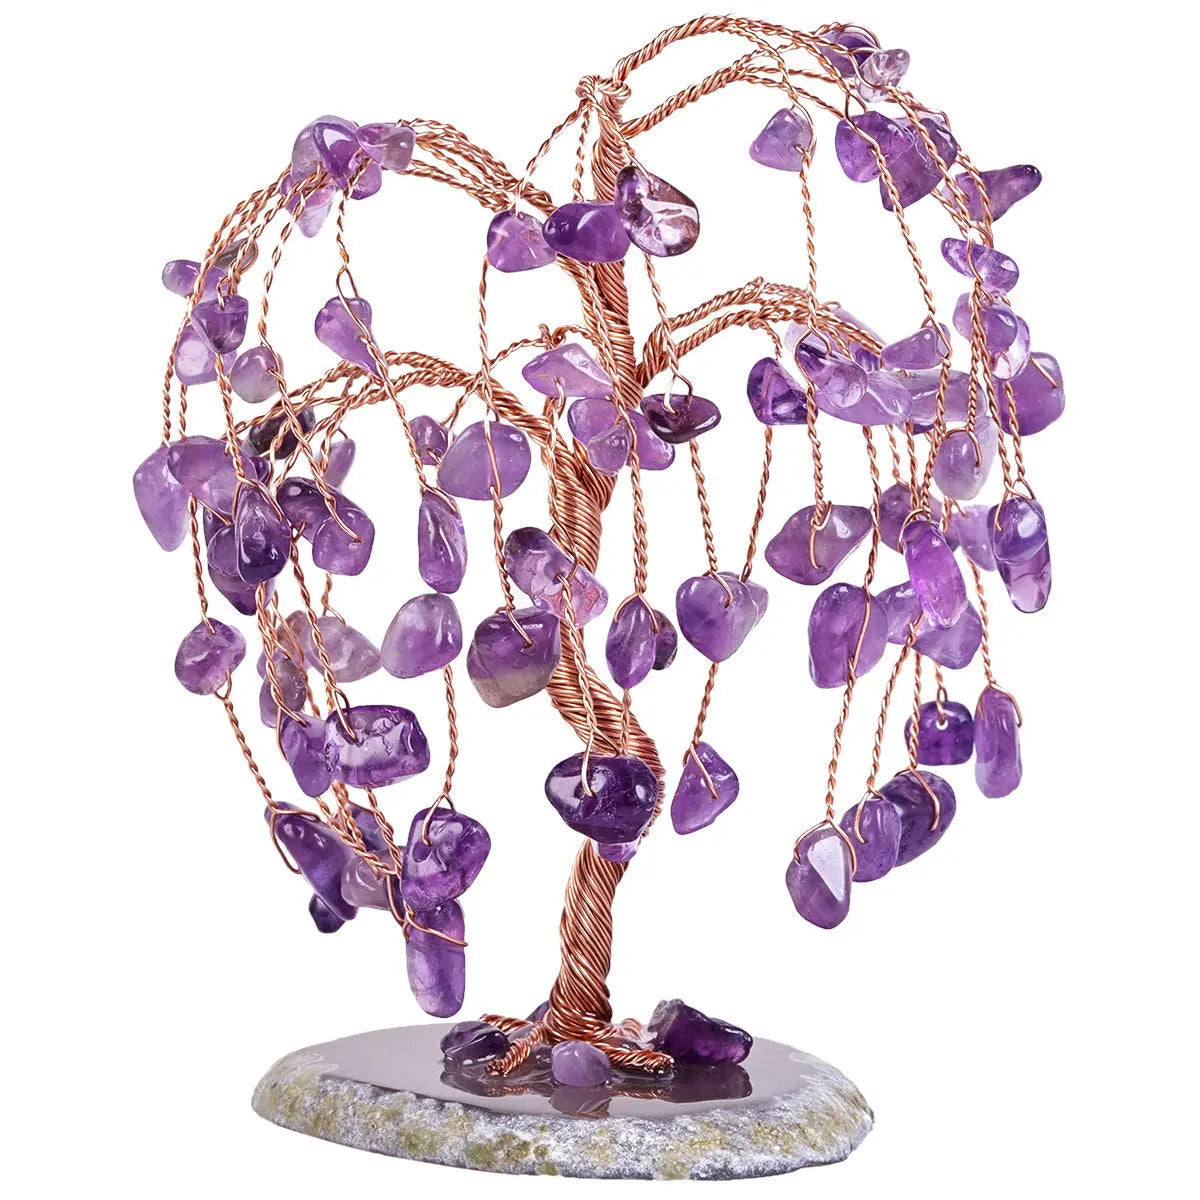 Willow Crystal Tree Energy Crystal Gravel Agate Base Crafts, Amethyst, Rose Quartz, Peridot Crystals Tree - Good Luck Wealth & Health Healing Crystal Home